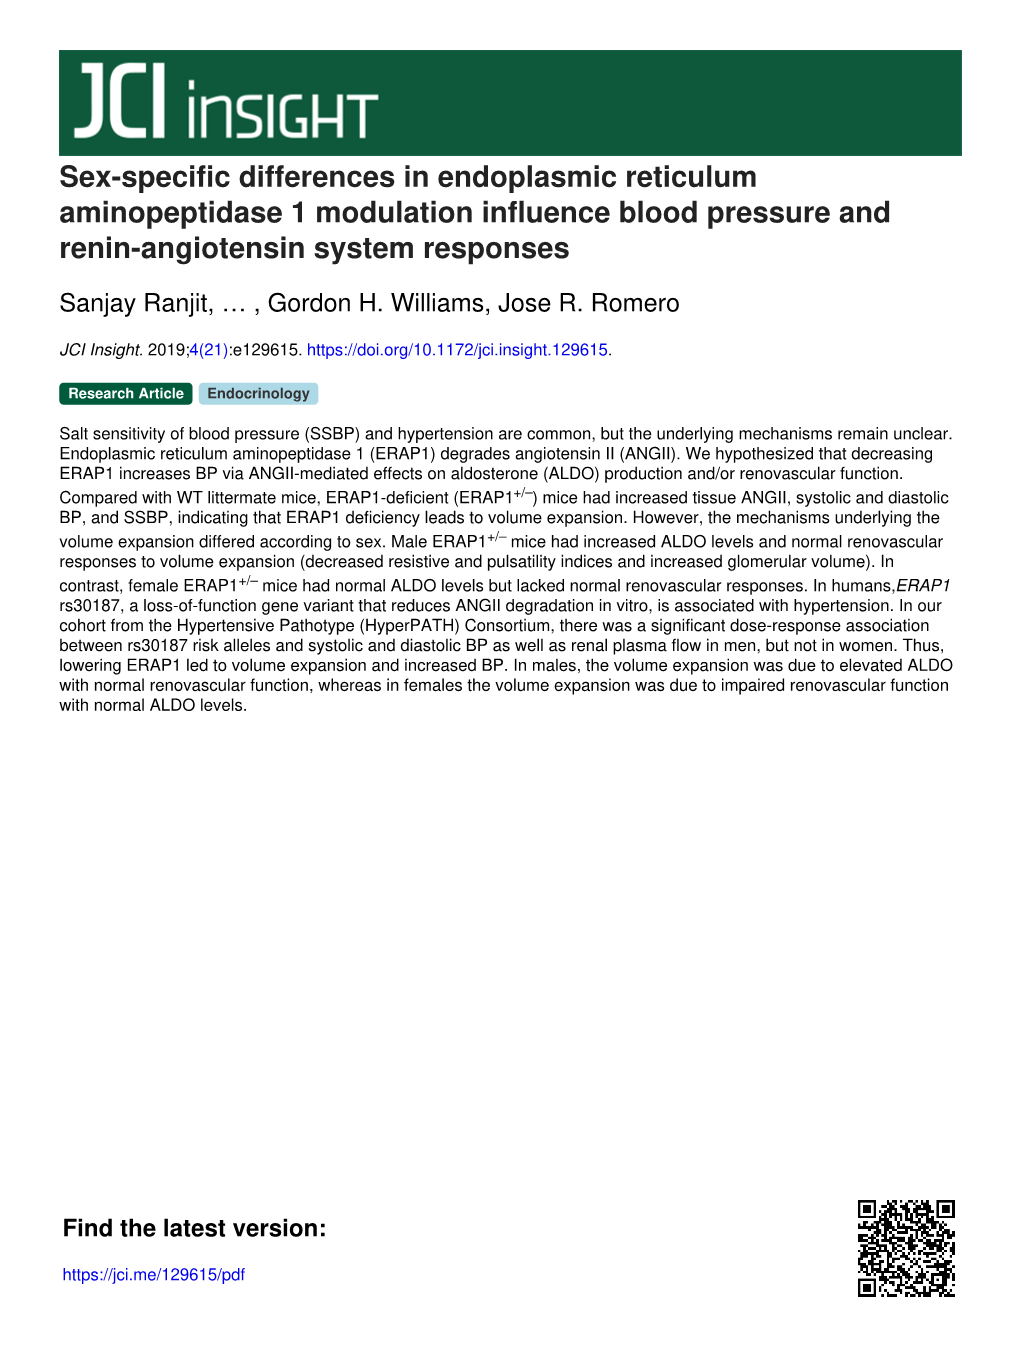 Sex-Specific Differences in Endoplasmic Reticulum Aminopeptidase 1 Modulation Influence Blood Pressure and Renin-Angiotensin System Responses